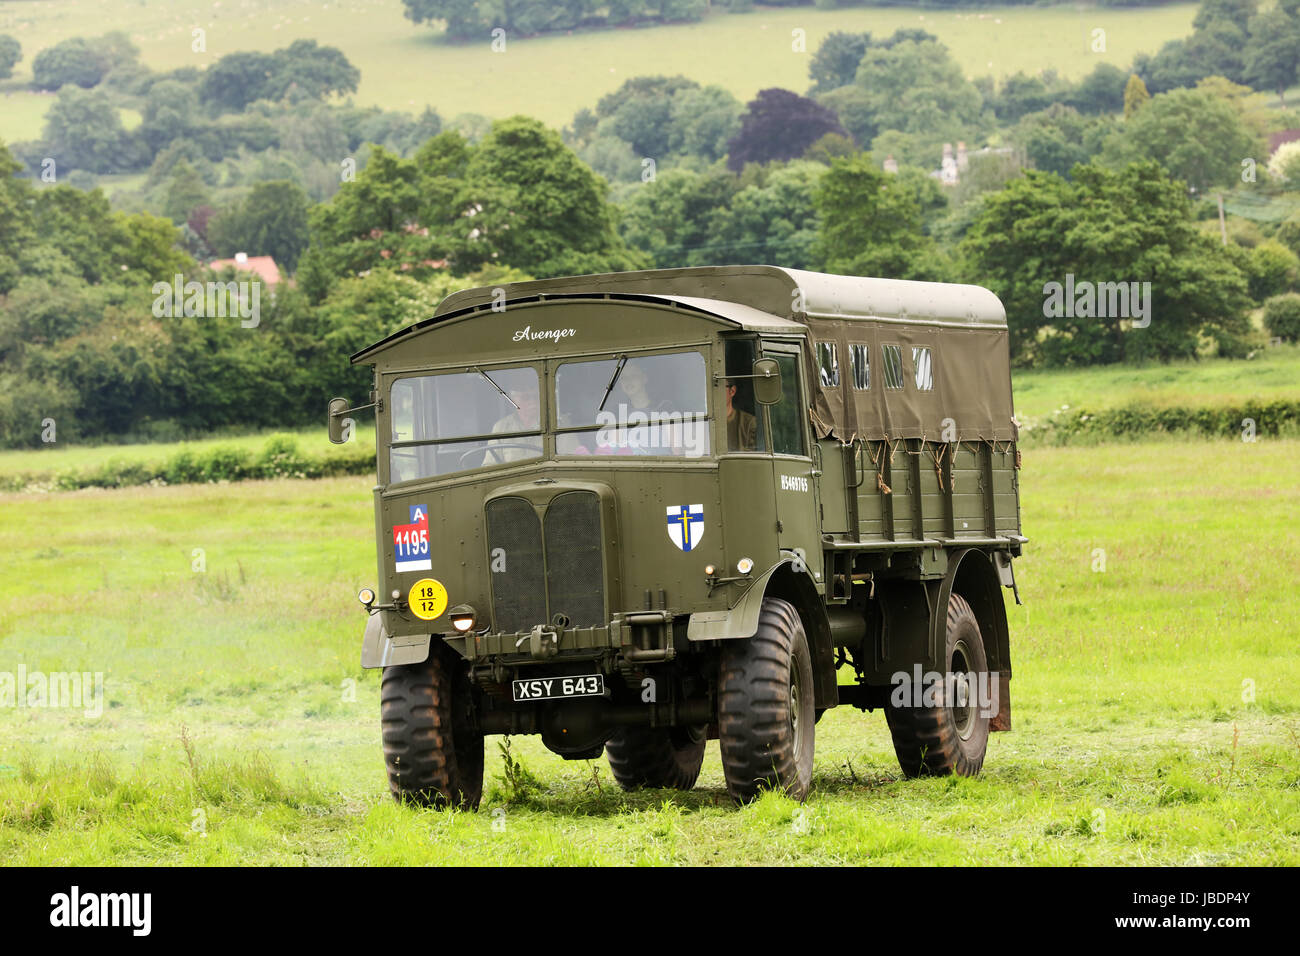 10th june 2017 - War and peace show at Wraxall in North Somerset.Engalnd. Stock Photo